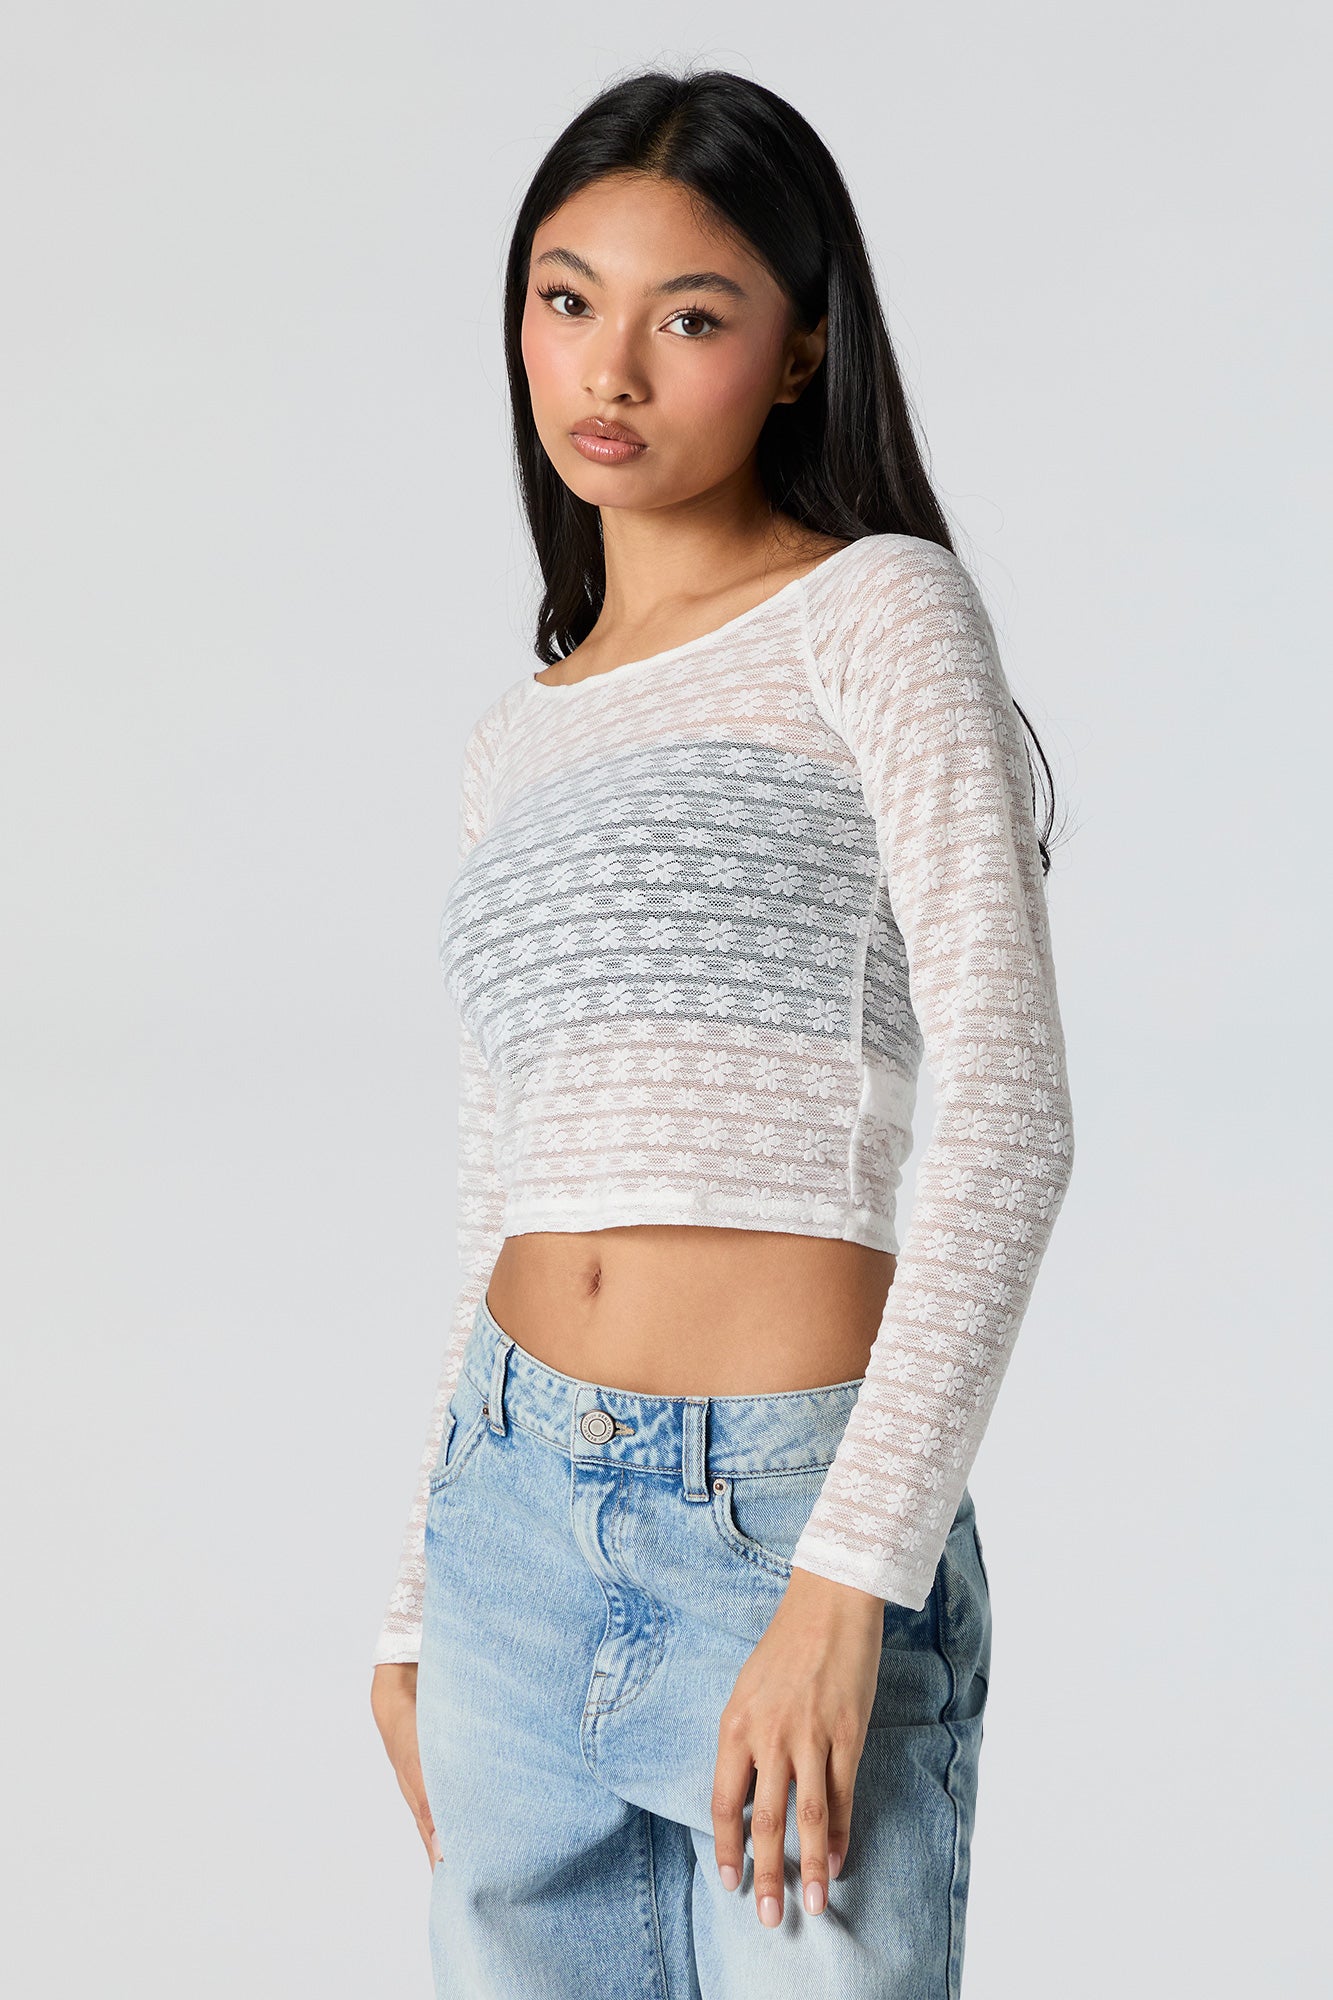 Floral Lace Long Sleeve Crop Top